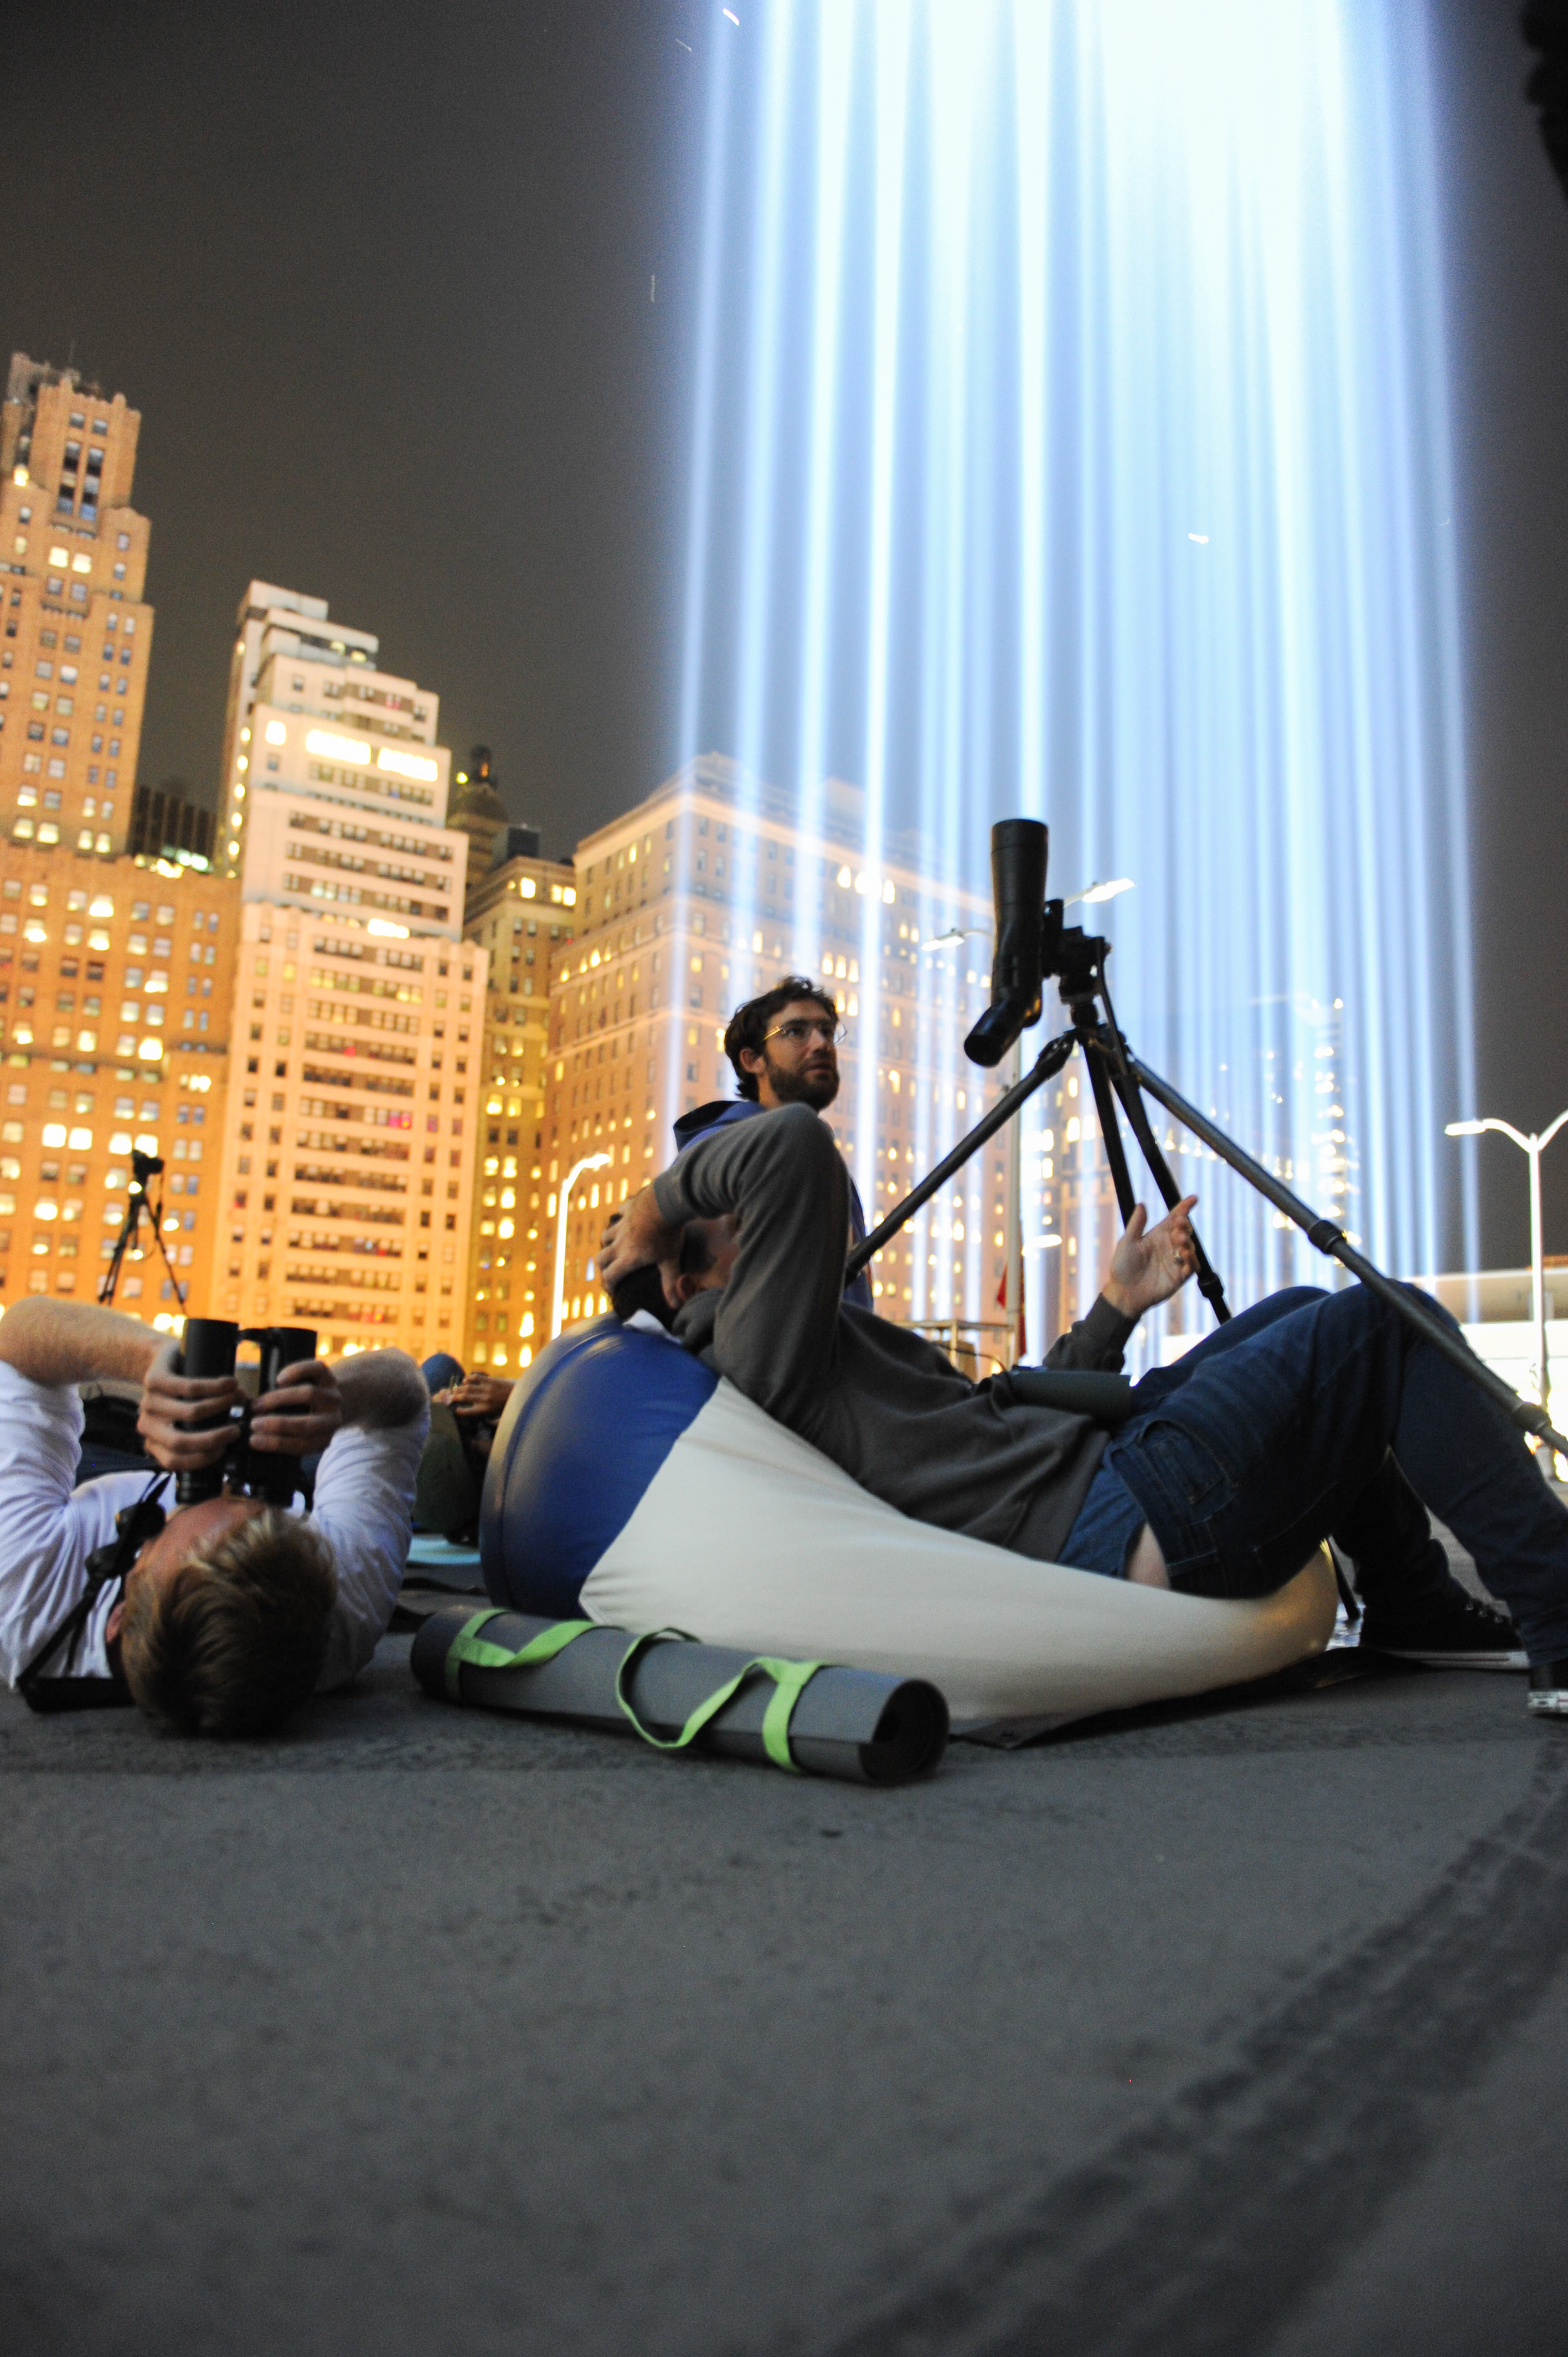 NYC Bird Alliance volunteers monitor the Tribute in Light each year for birds stuck circling in the Tribute’s powerful beams. Photo: NYC Bird Alliance